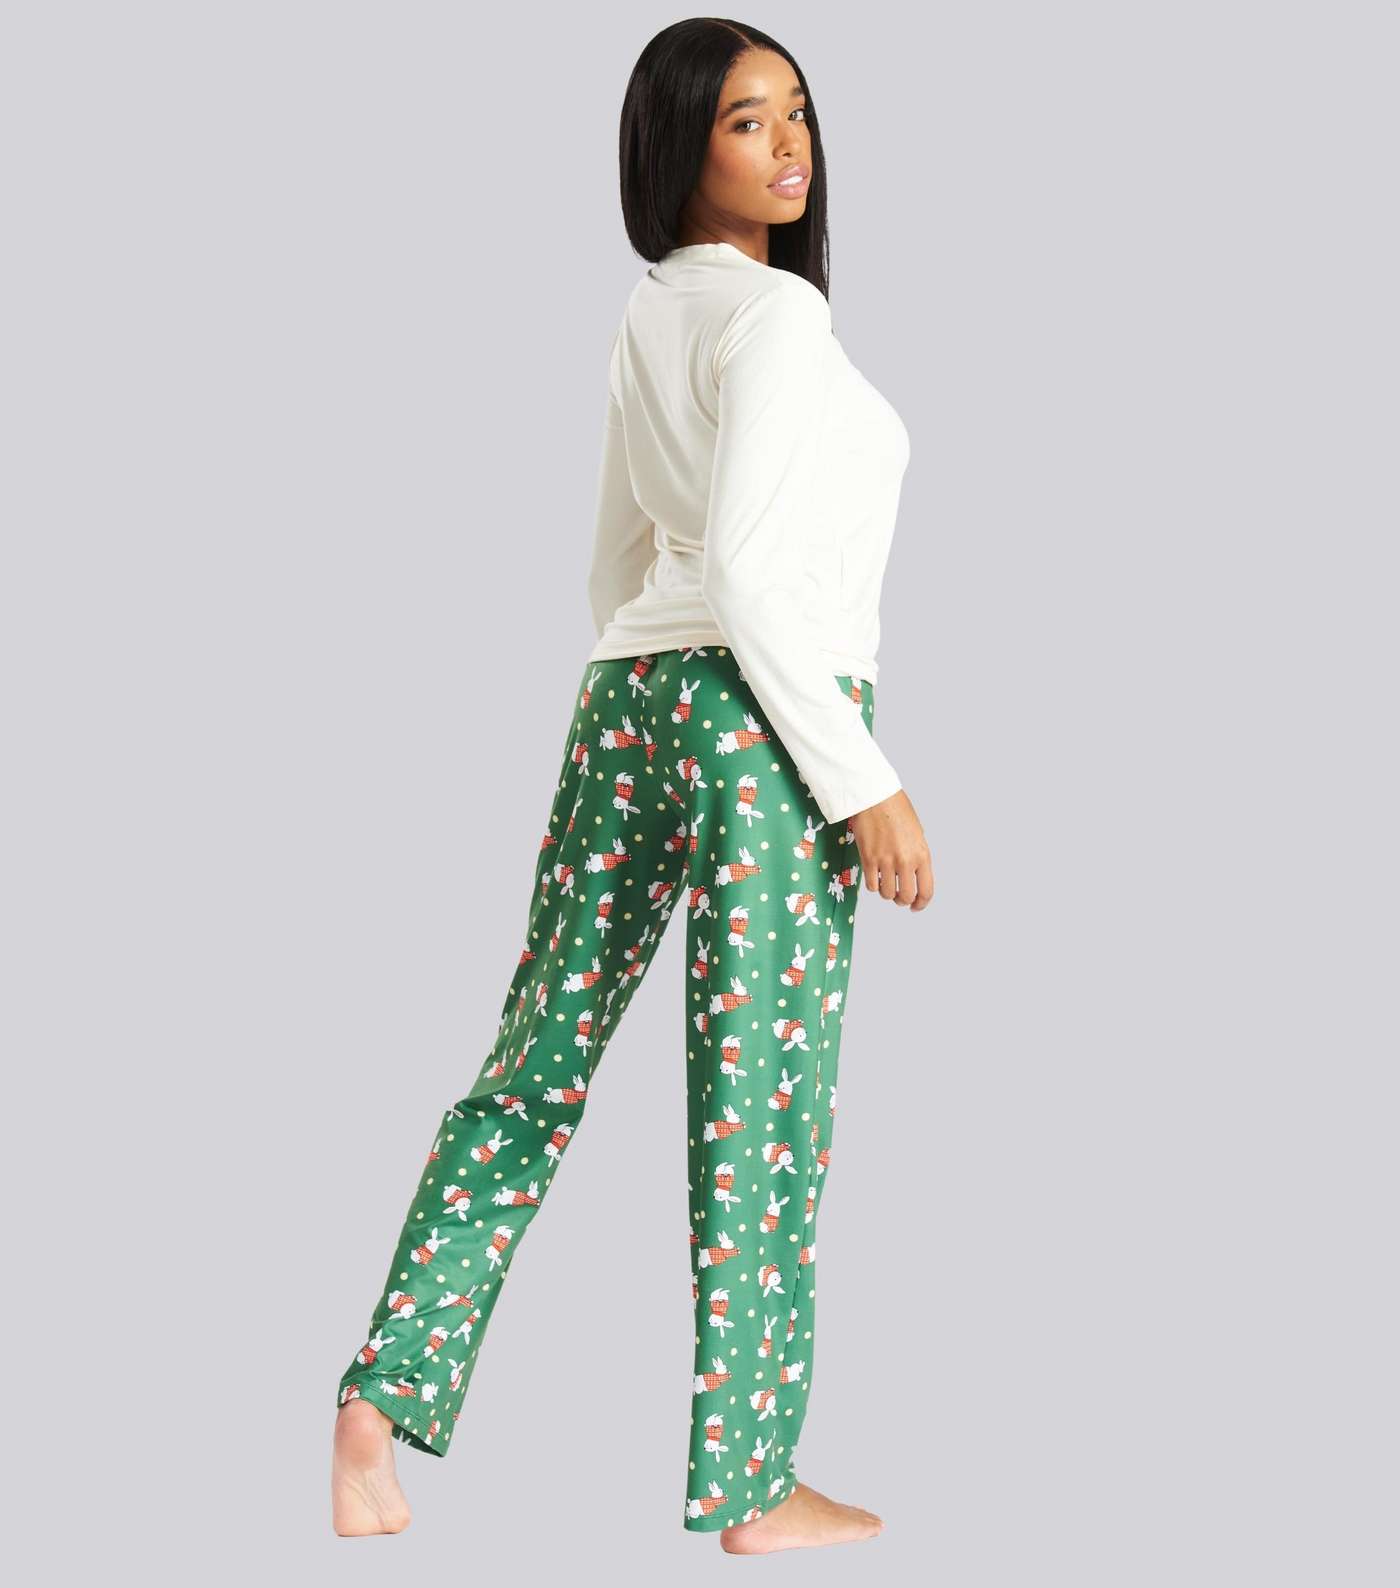 Loungeable Green Trouser Pyjama Set with Bunny Print Image 5